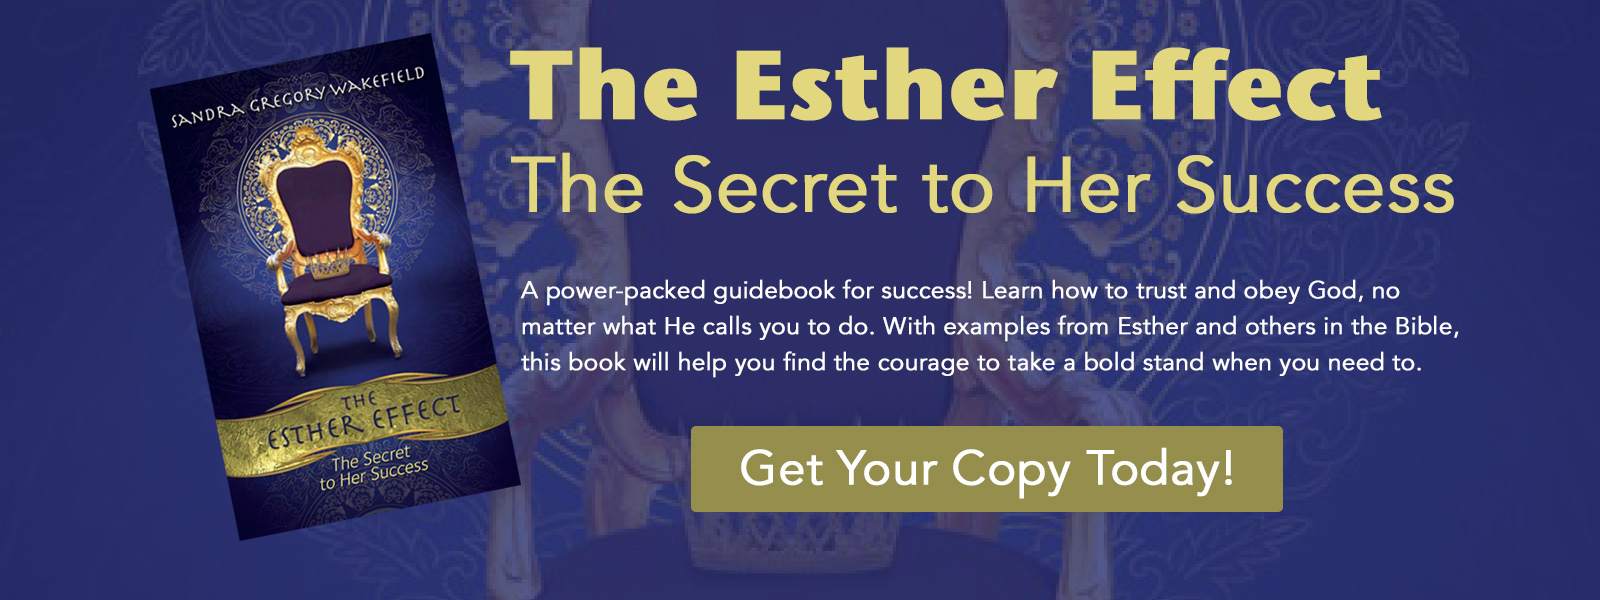 The Esther Effect